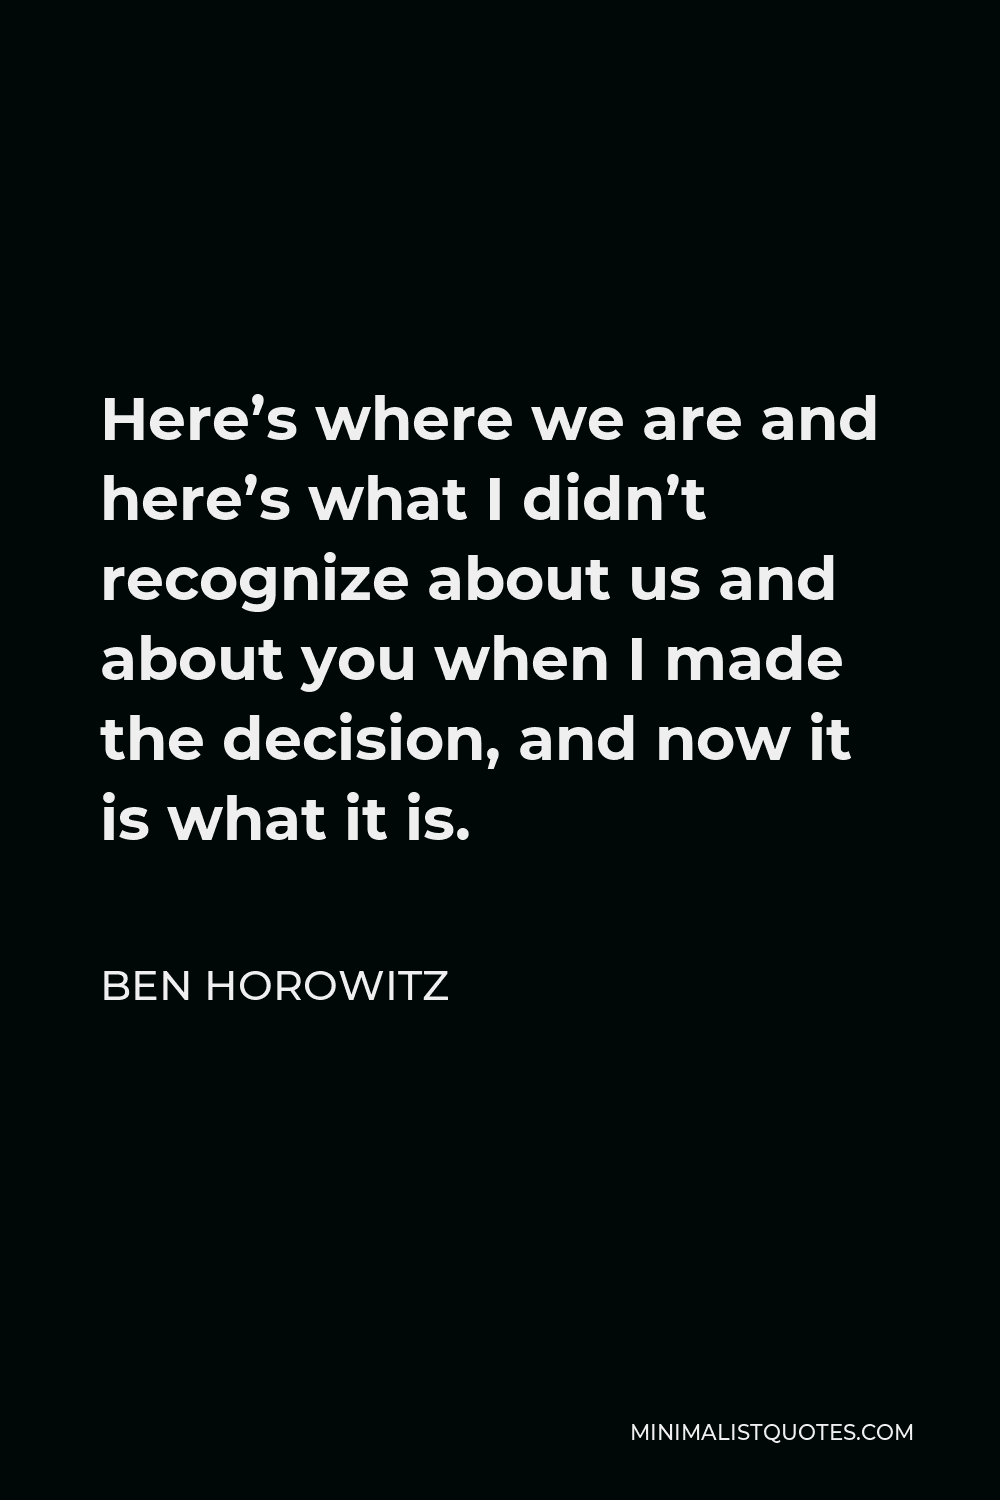 Ben Horowitz Quote - Here’s where we are and here’s what I didn’t recognize about us and about you when I made the decision, and now it is what it is.